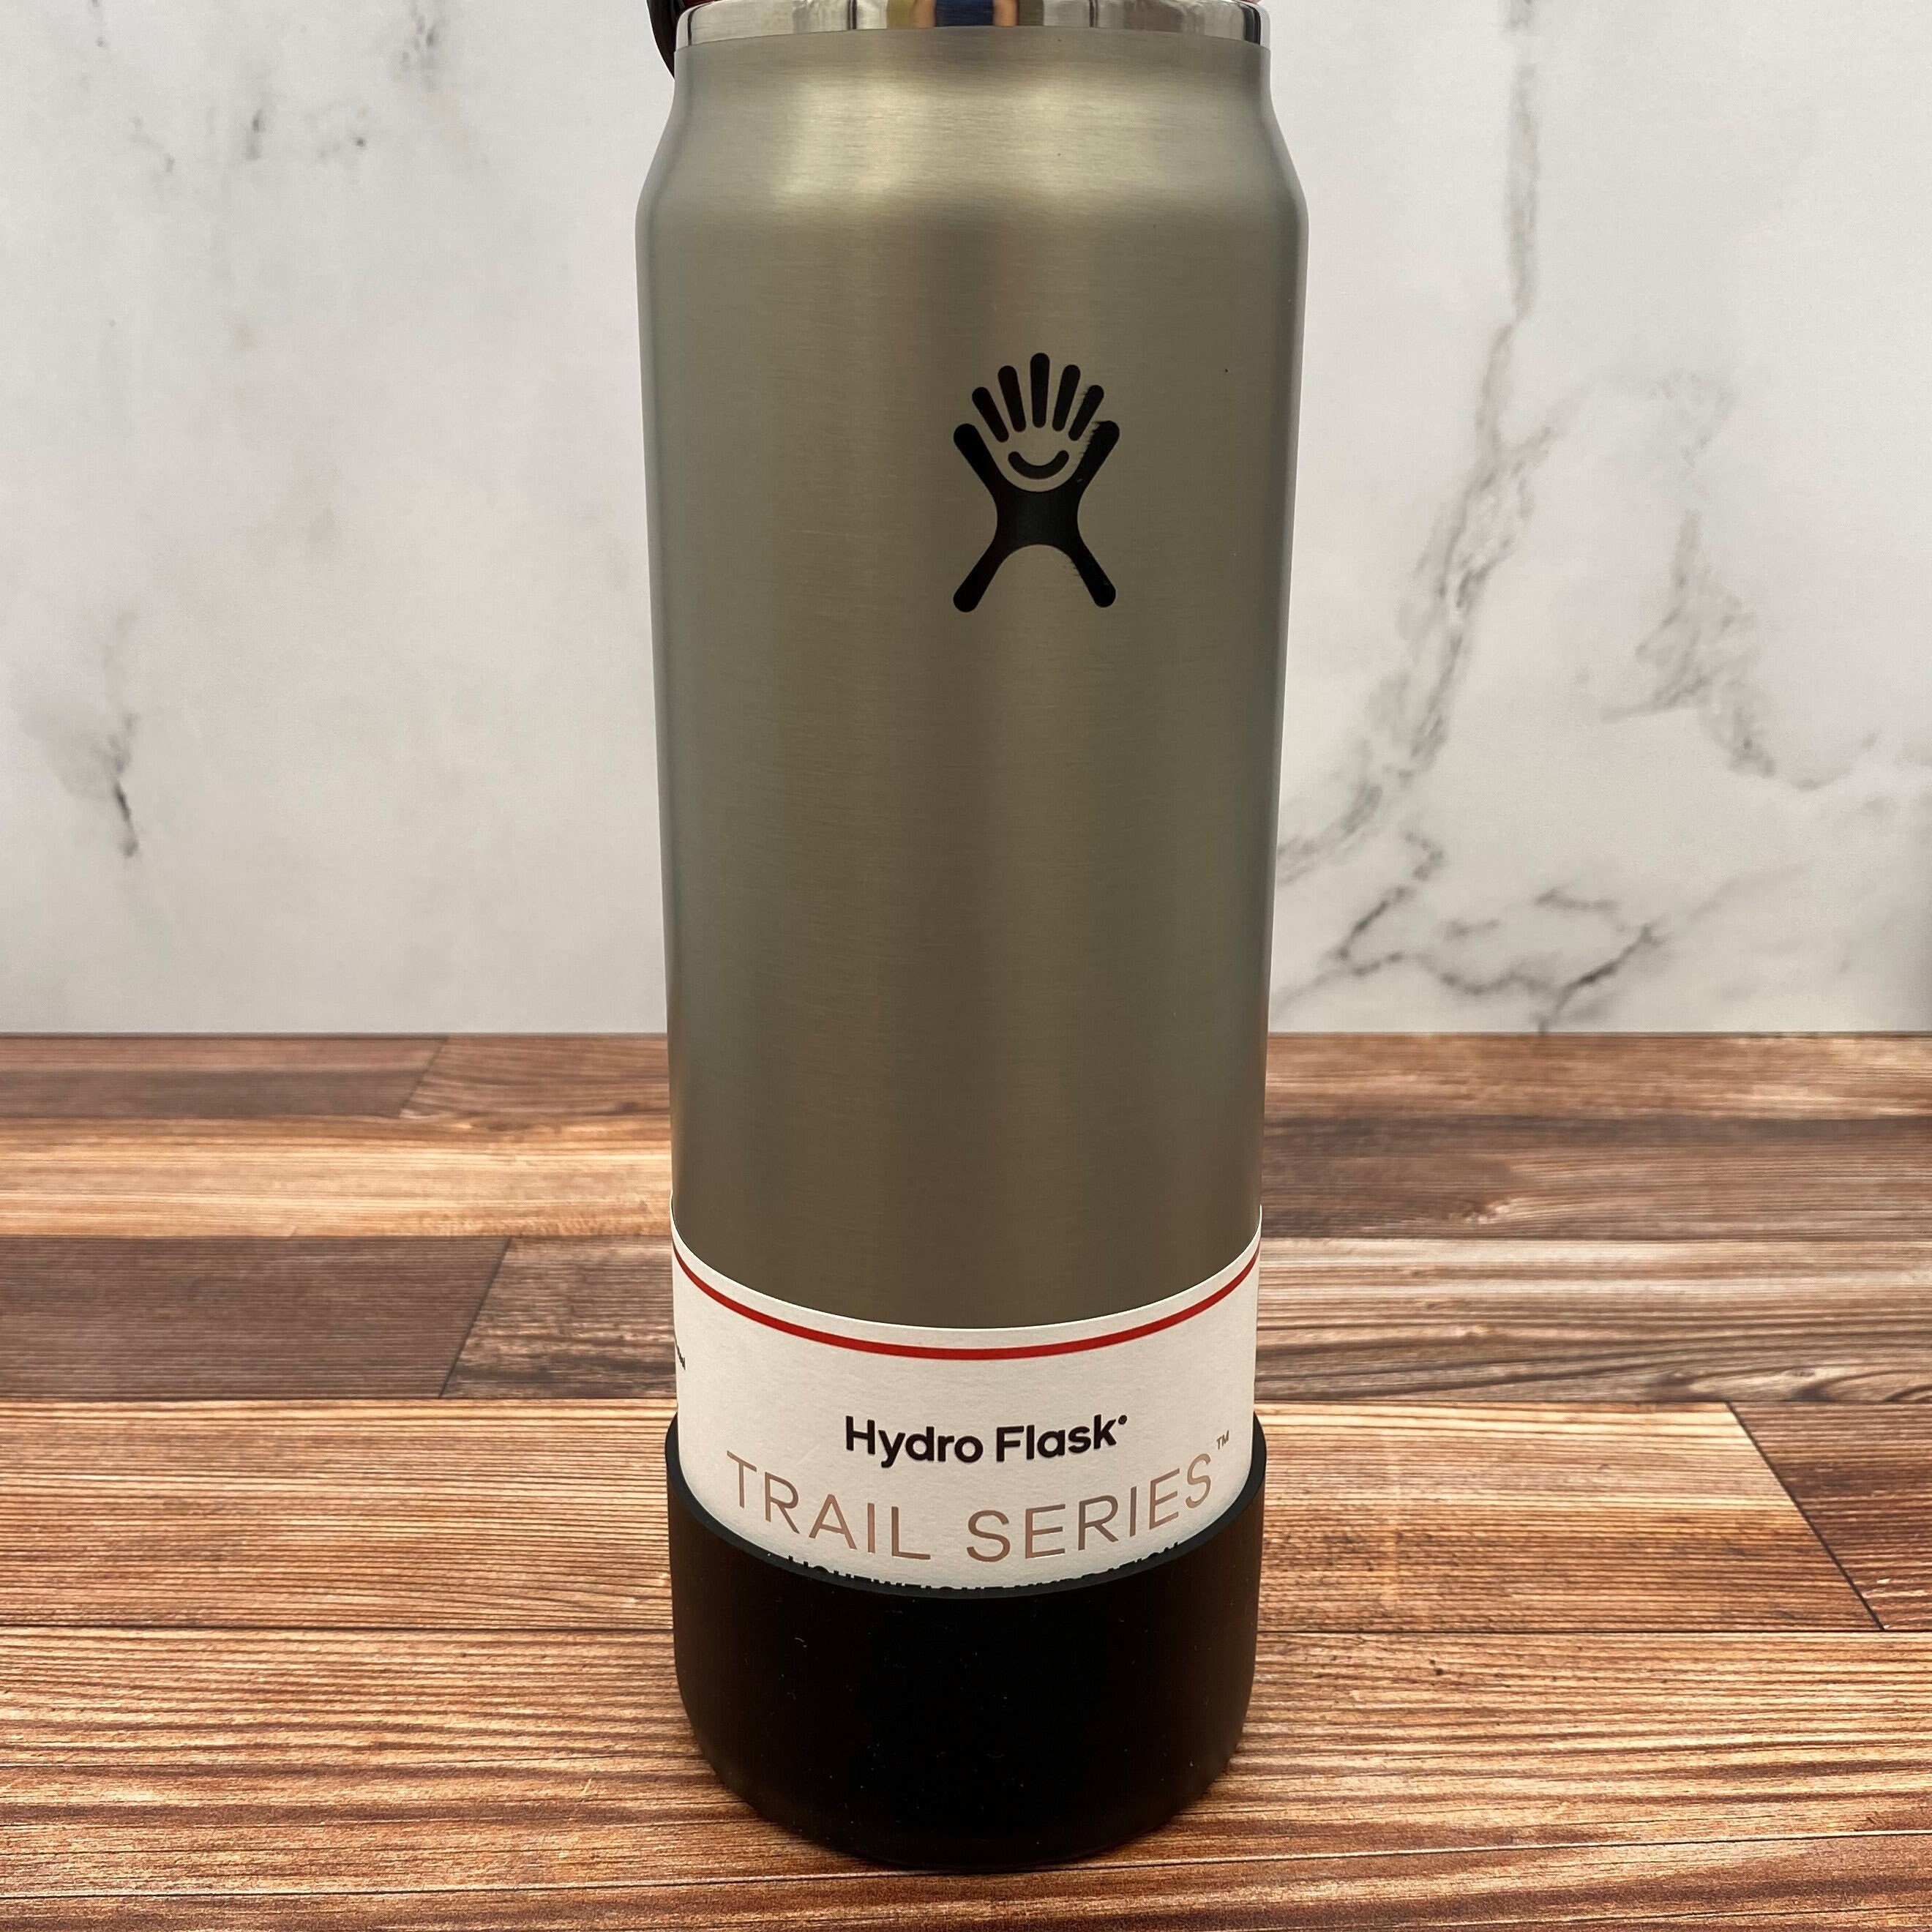 BottleButts™ CLEAR Silicone Boot for Hydro Flask Lightweight Trail Ser